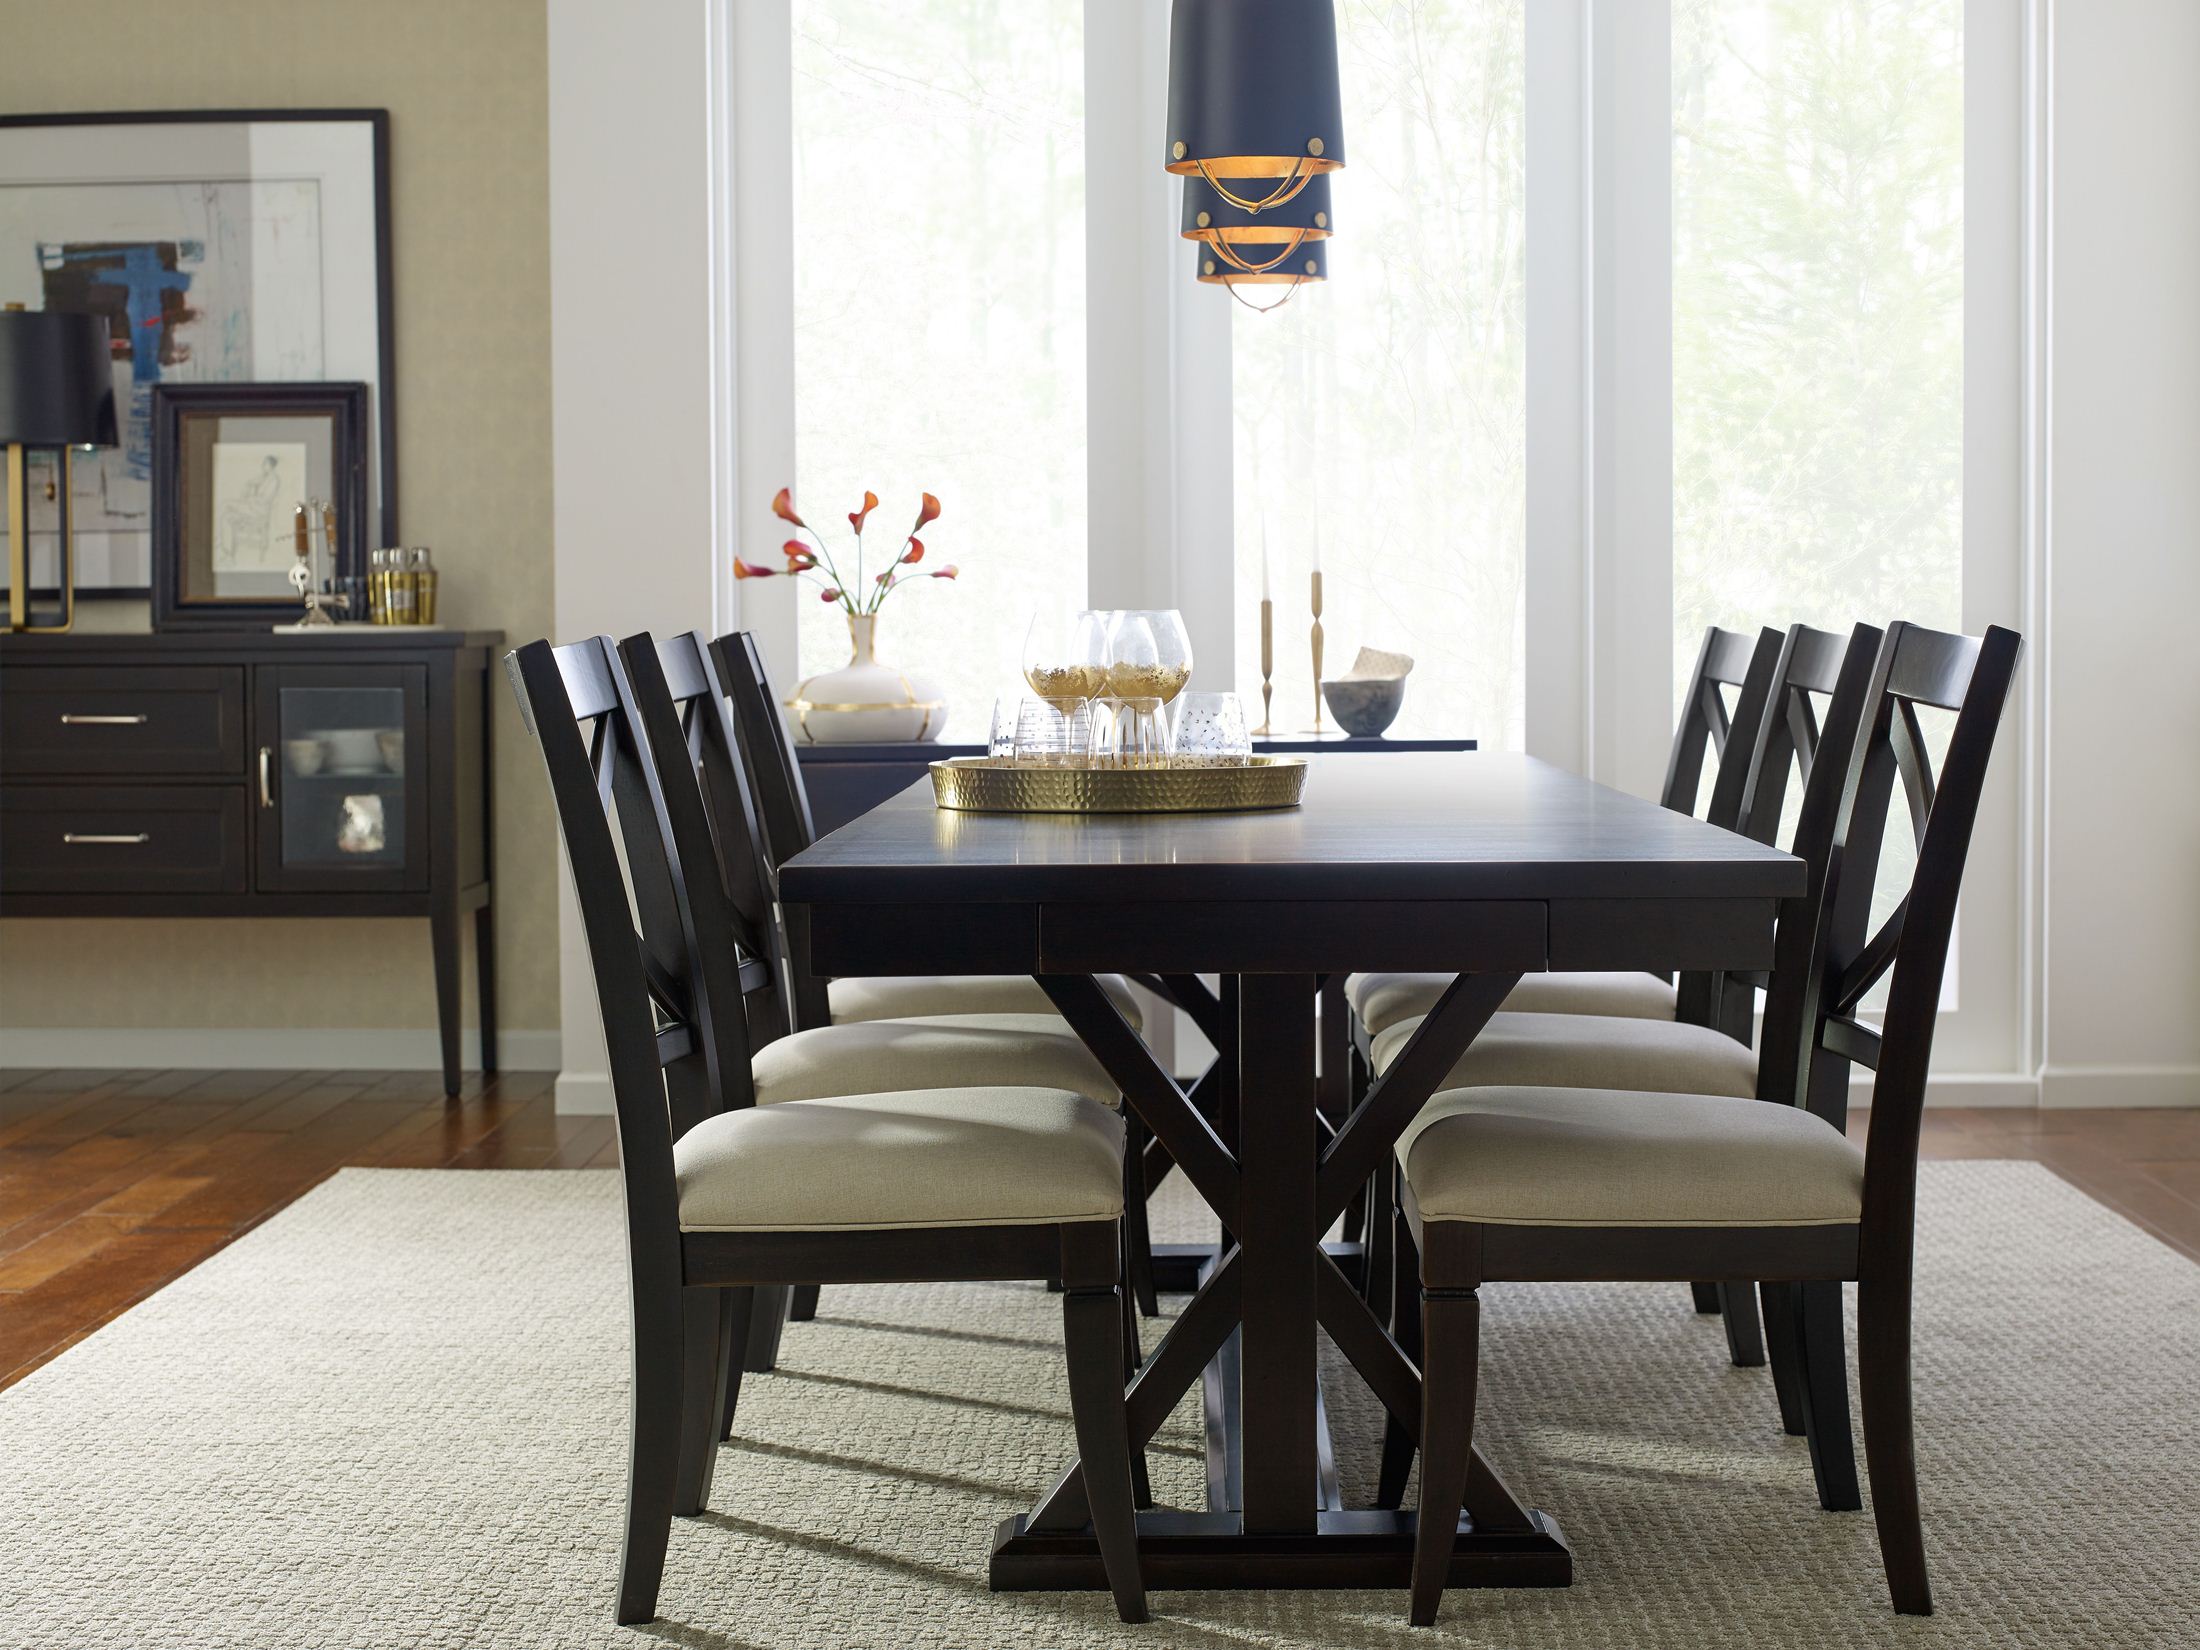 Peppercorn Dining Room Chairs For Sale